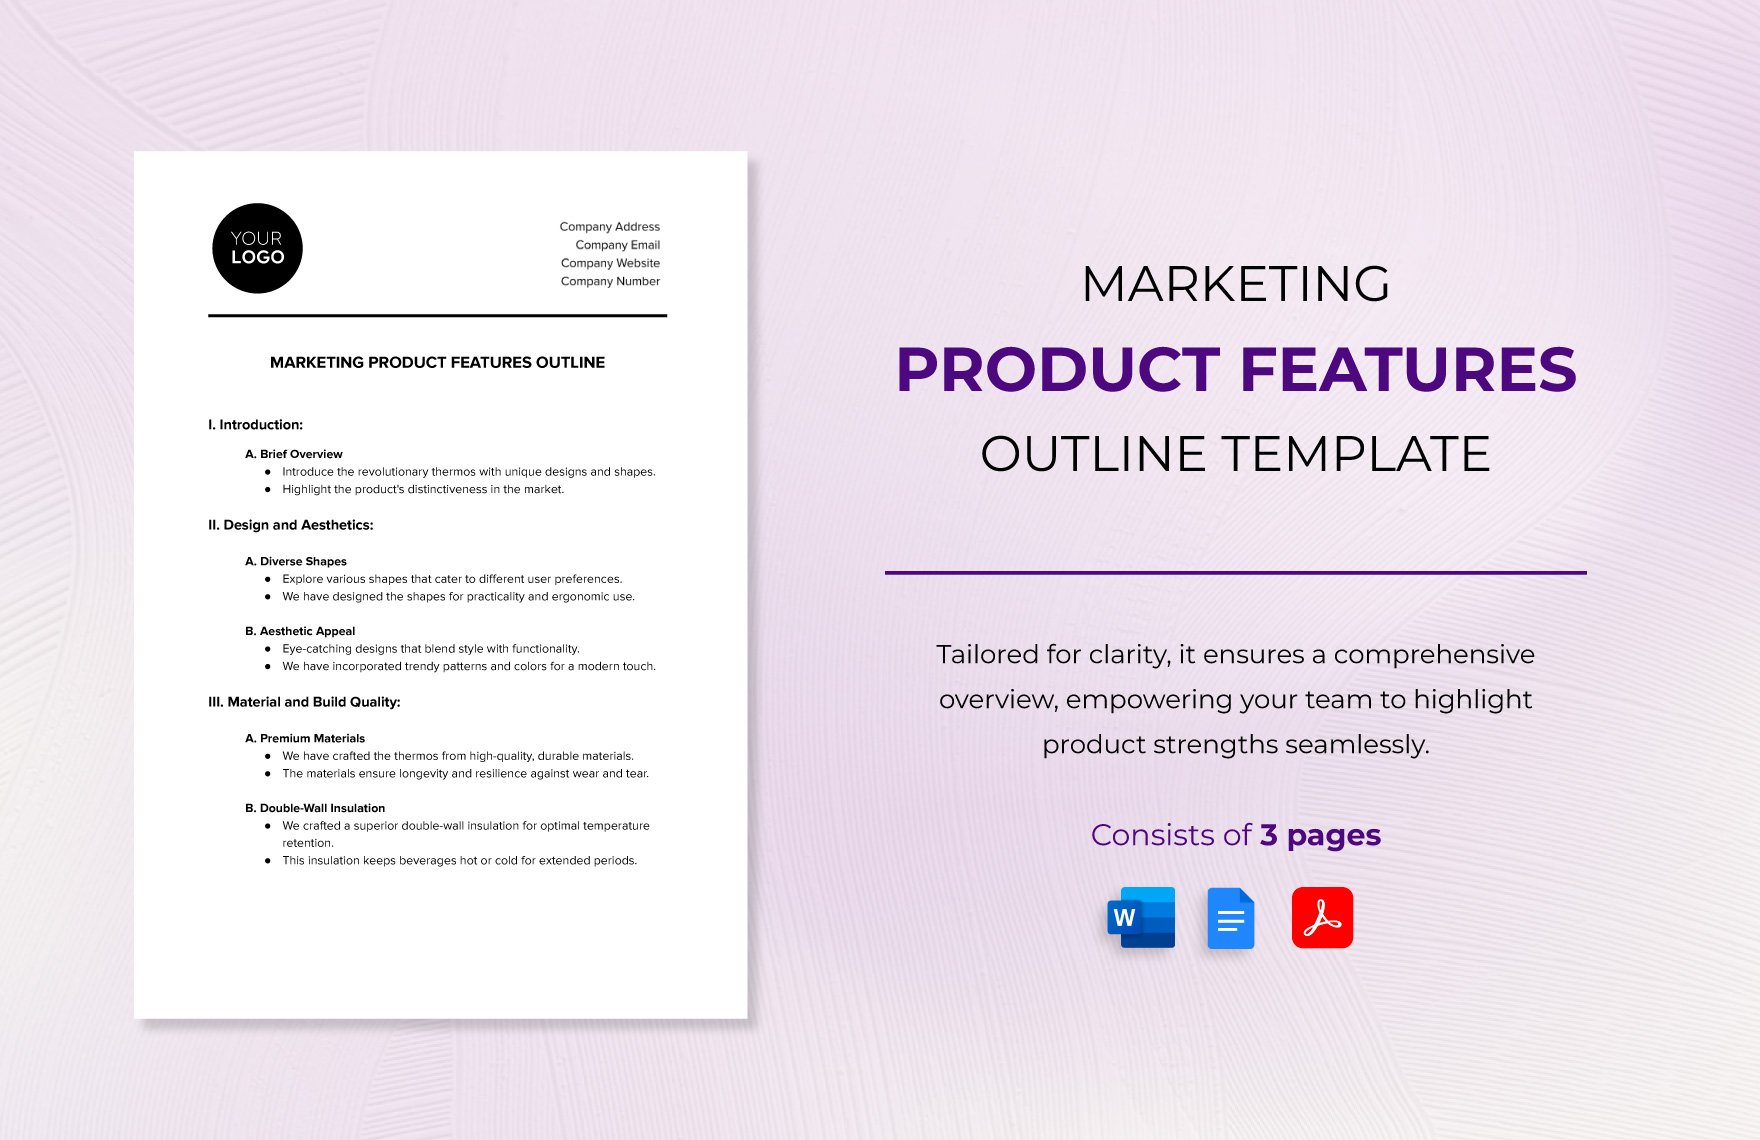 Marketing Product Features Outline Template in Word, Google Docs, PDF